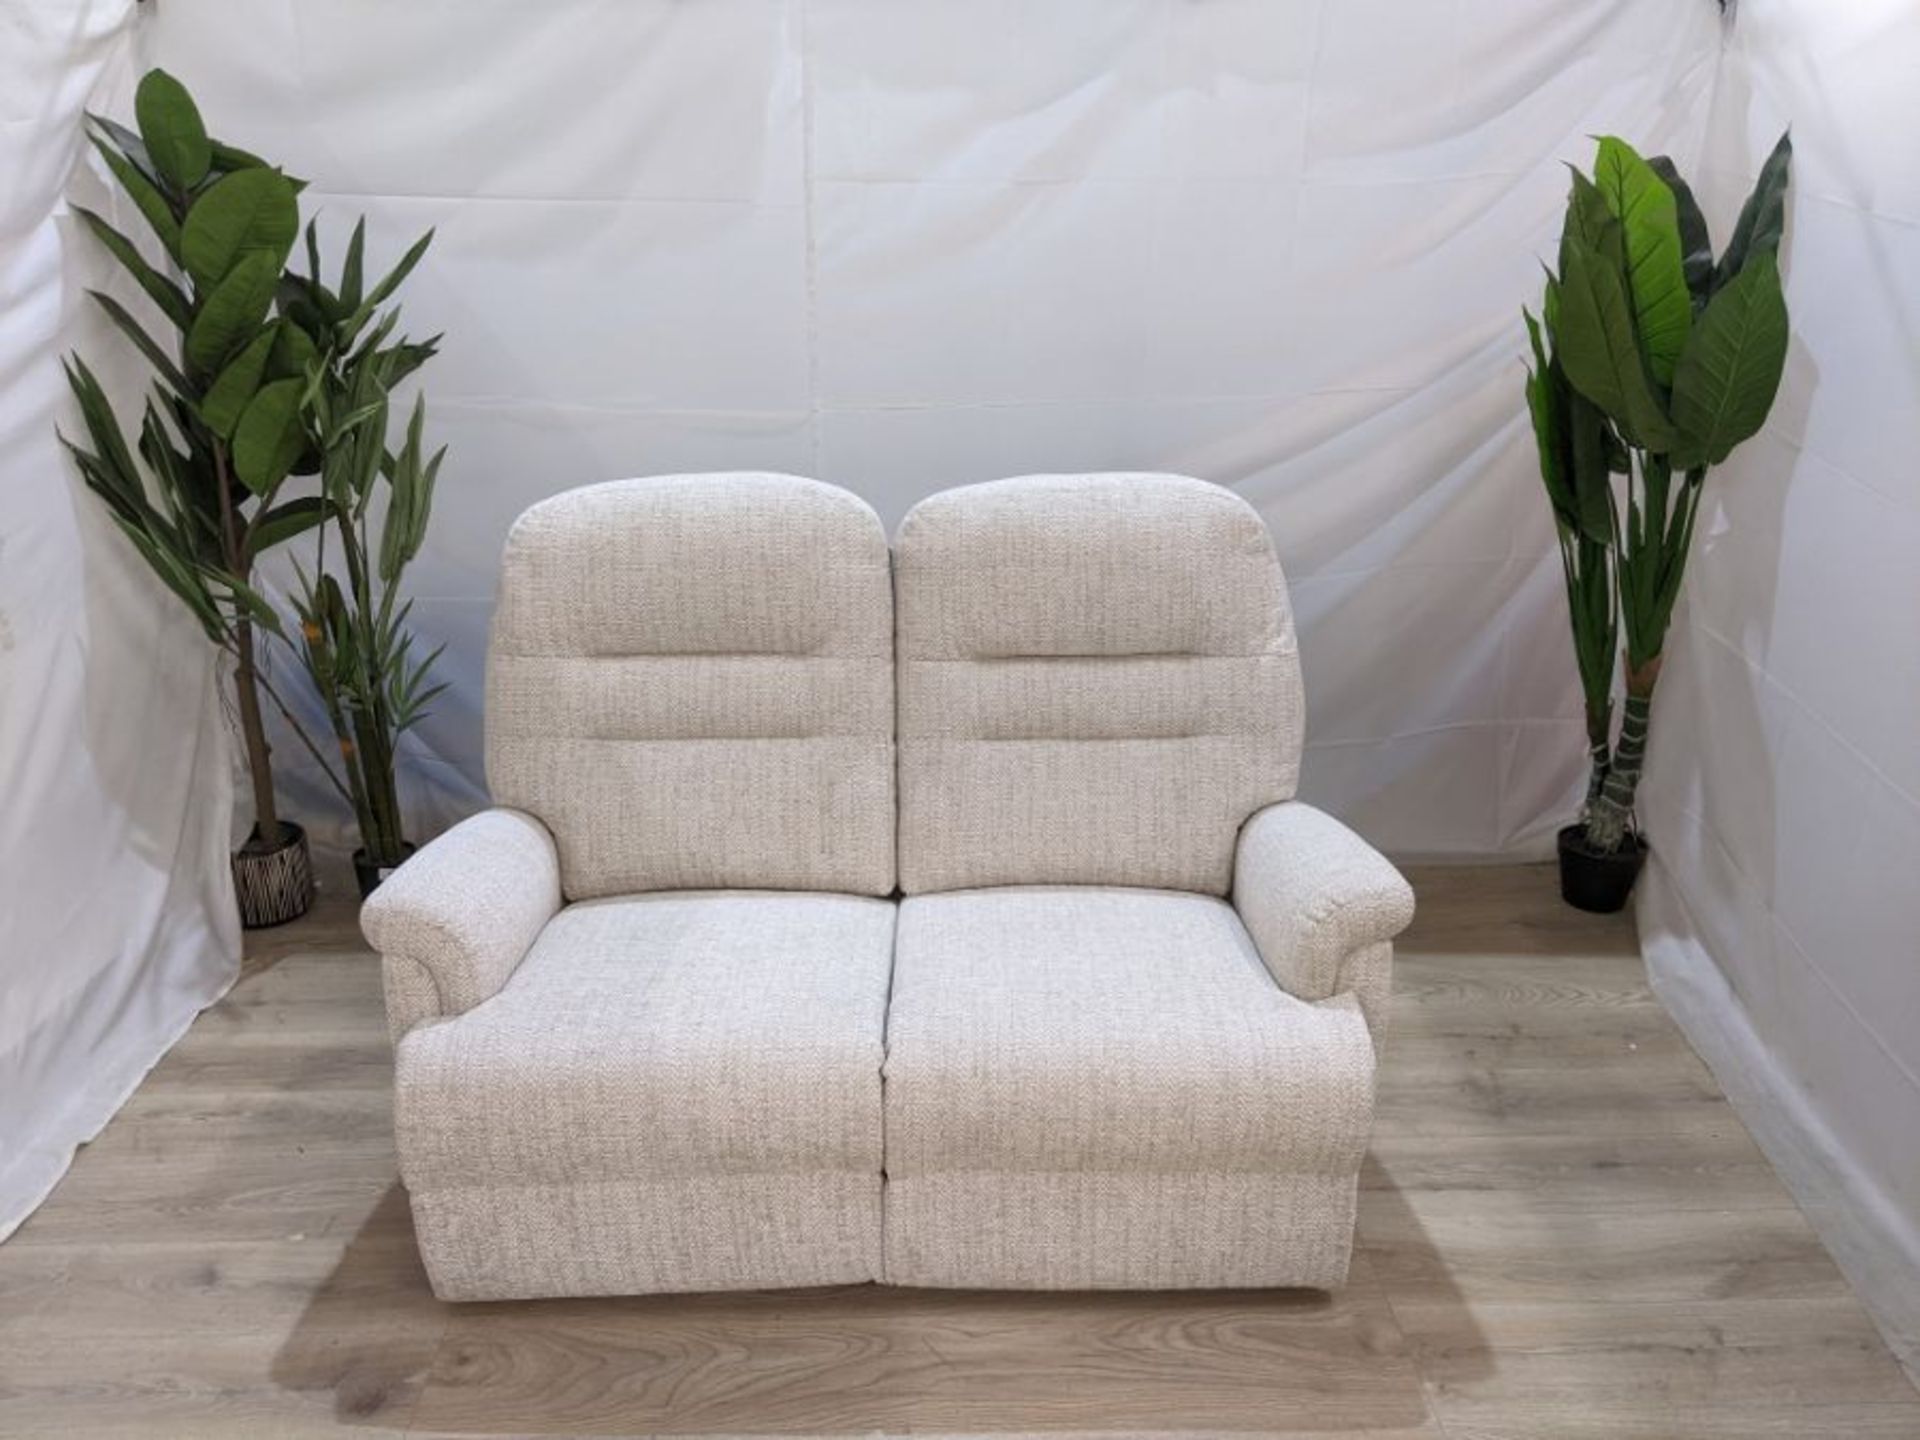 HSL Penrith Super Petite Canillo Ivory 2 Seater Sofa Head Support RRP 1360 SKU HSL-AP-FT0102981137D